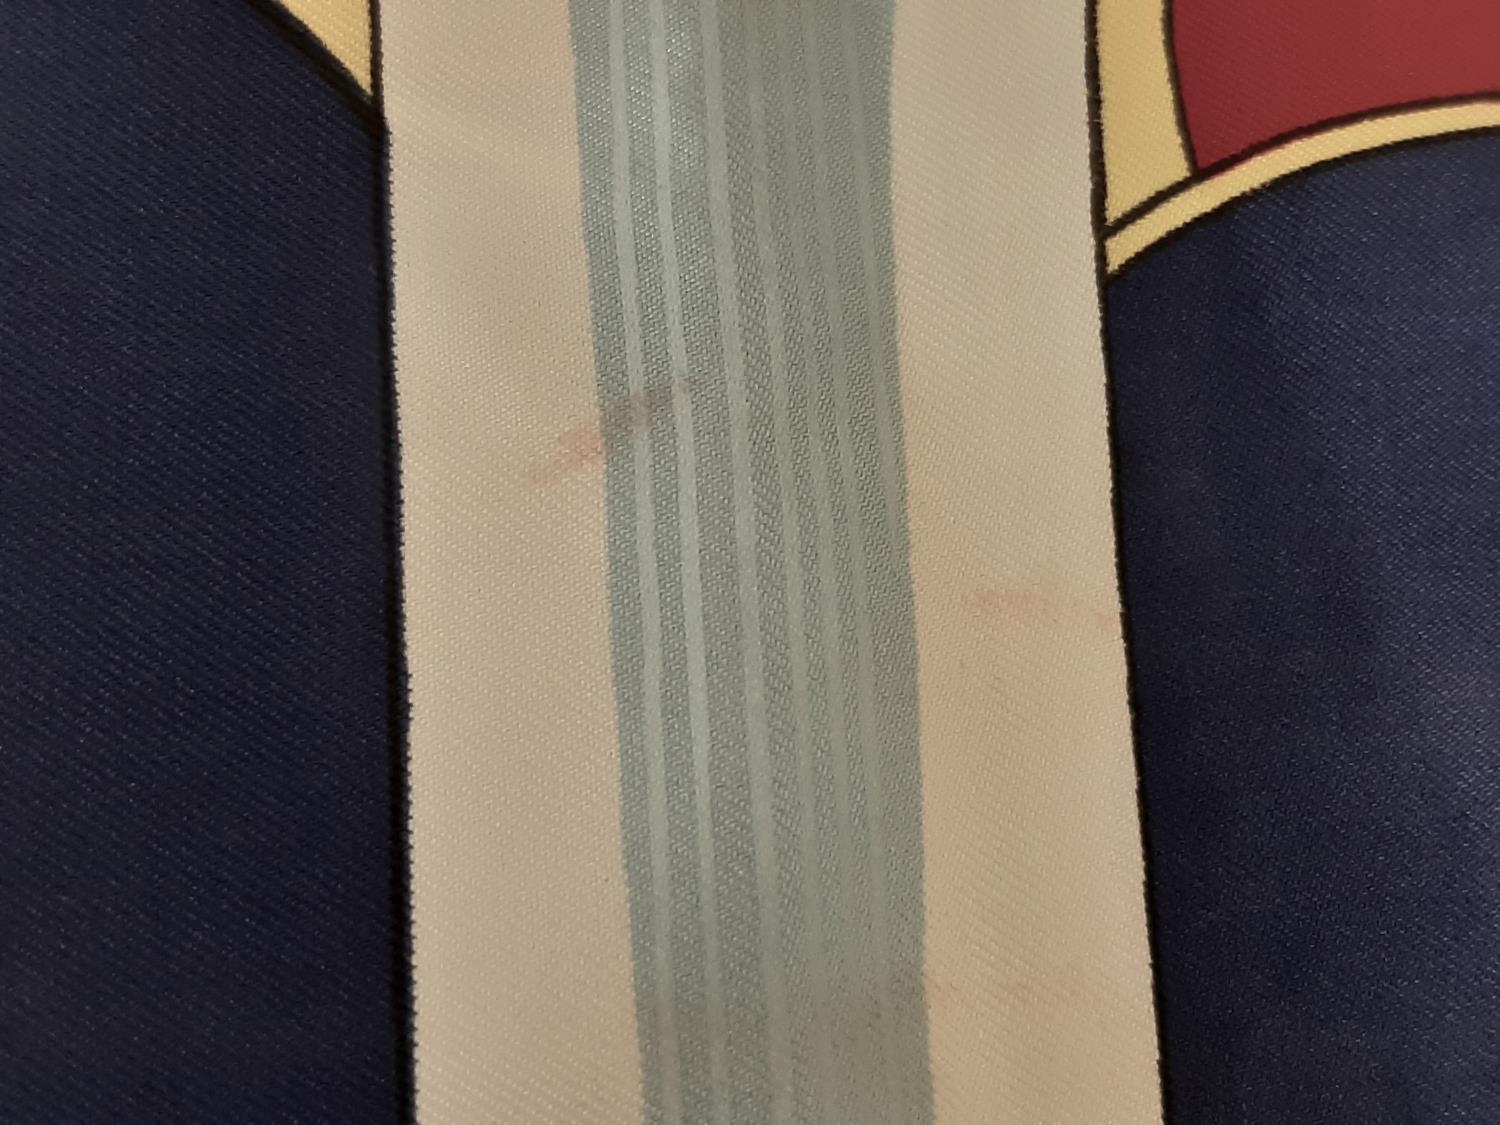 Hermès Les Coupes silk scarf designed by Françoise de la Perriere 176x 33cm in abstract carriage - Image 8 of 10